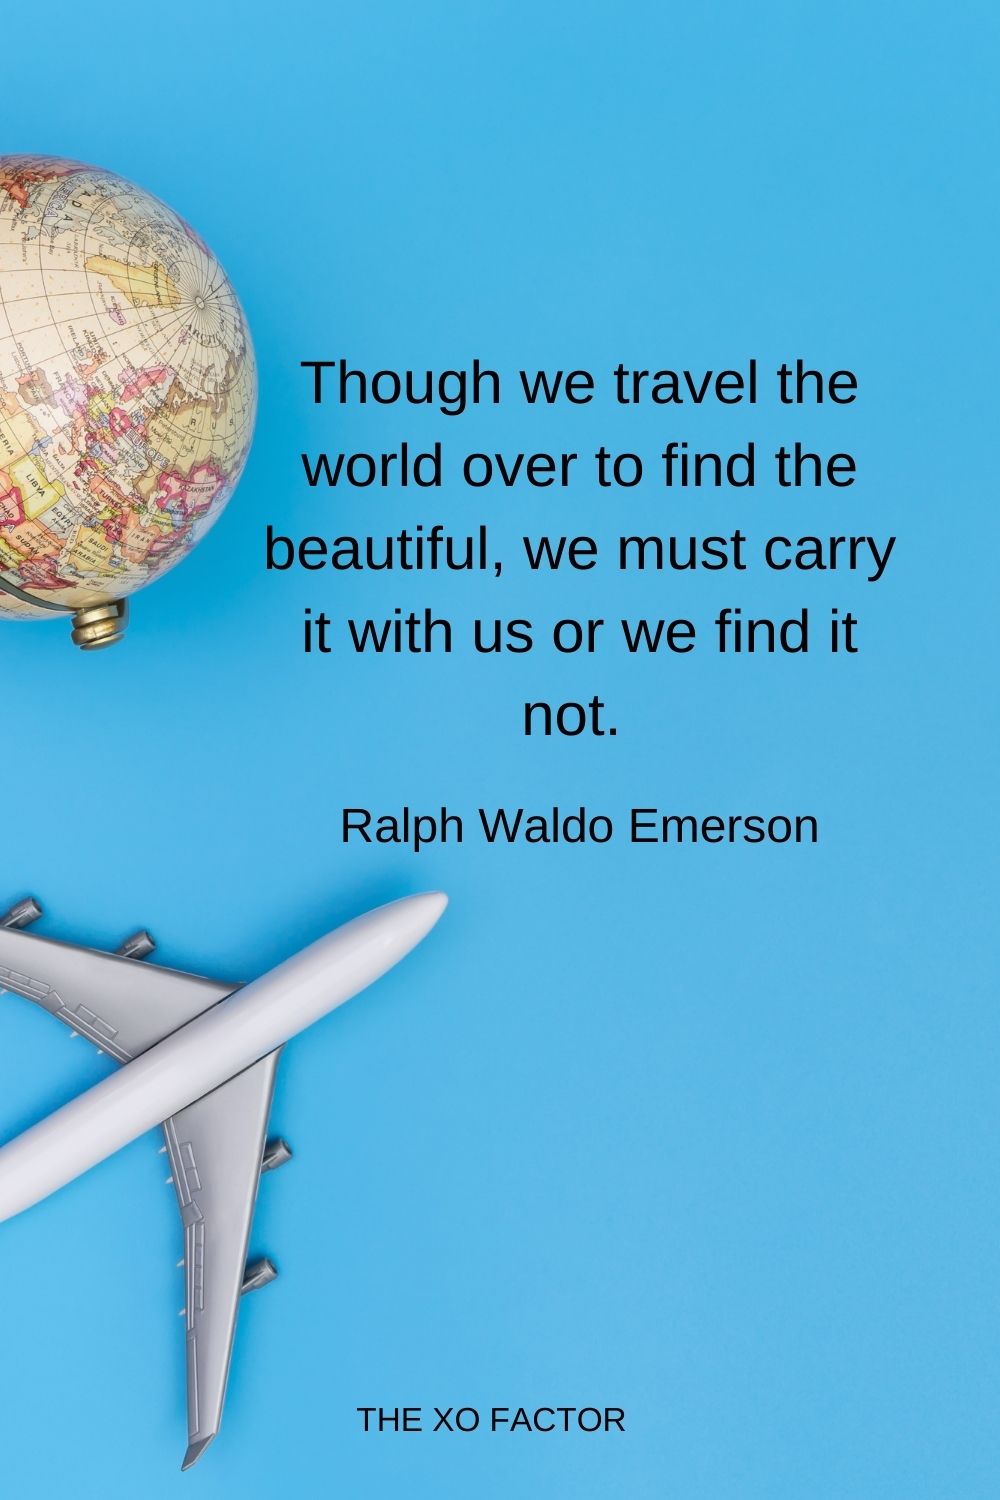 Though we travel the world over to find the beautiful, we must carry it with us or we find it not.  Ralph Waldo Emerson